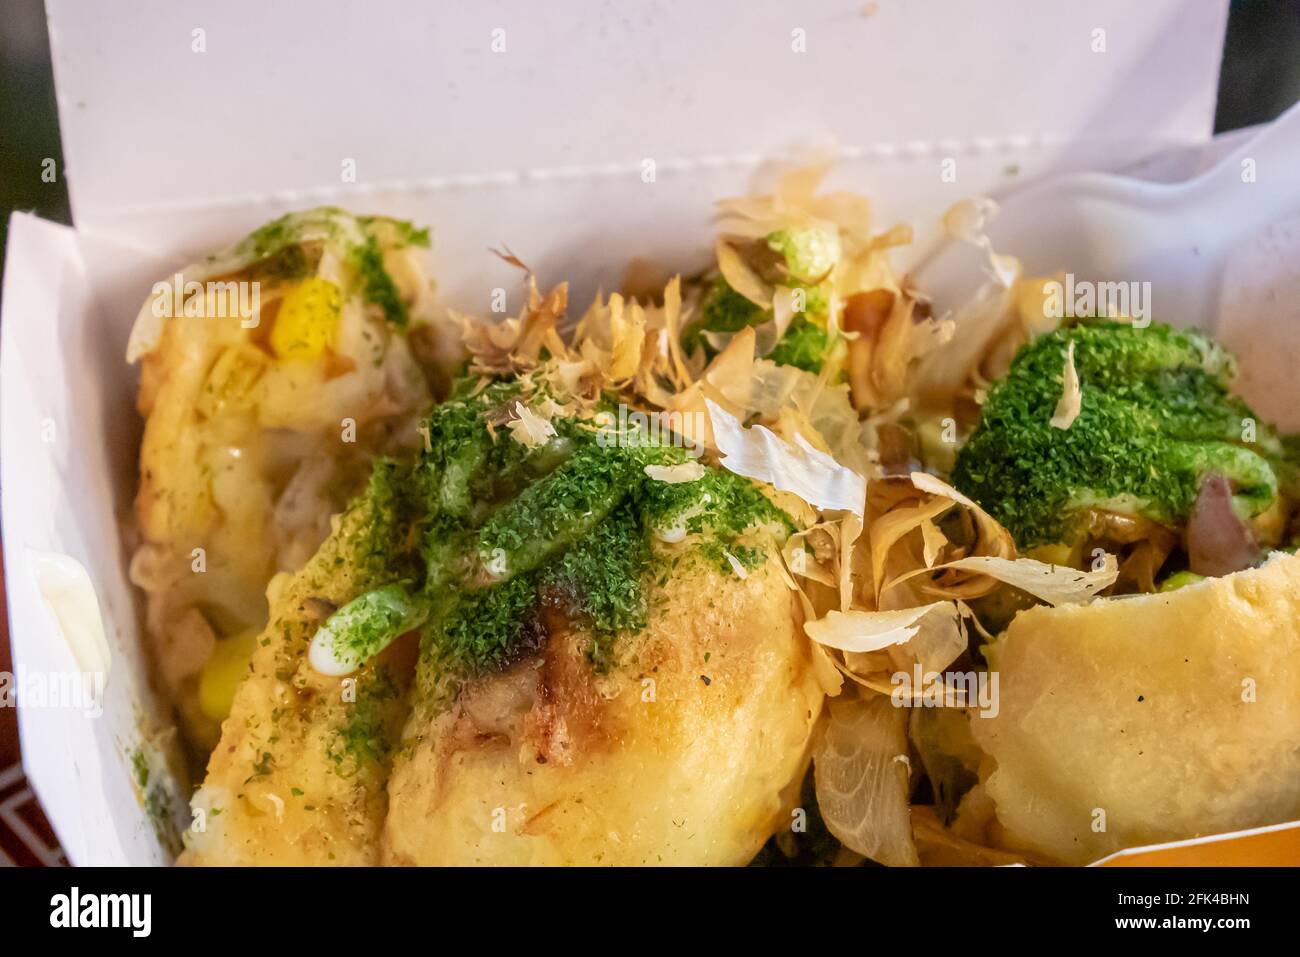 Big takoyaki, a close up of Japanese delicious fried octopus balls food in white paper box at Taipei night market, Taiwan. Stock Photo